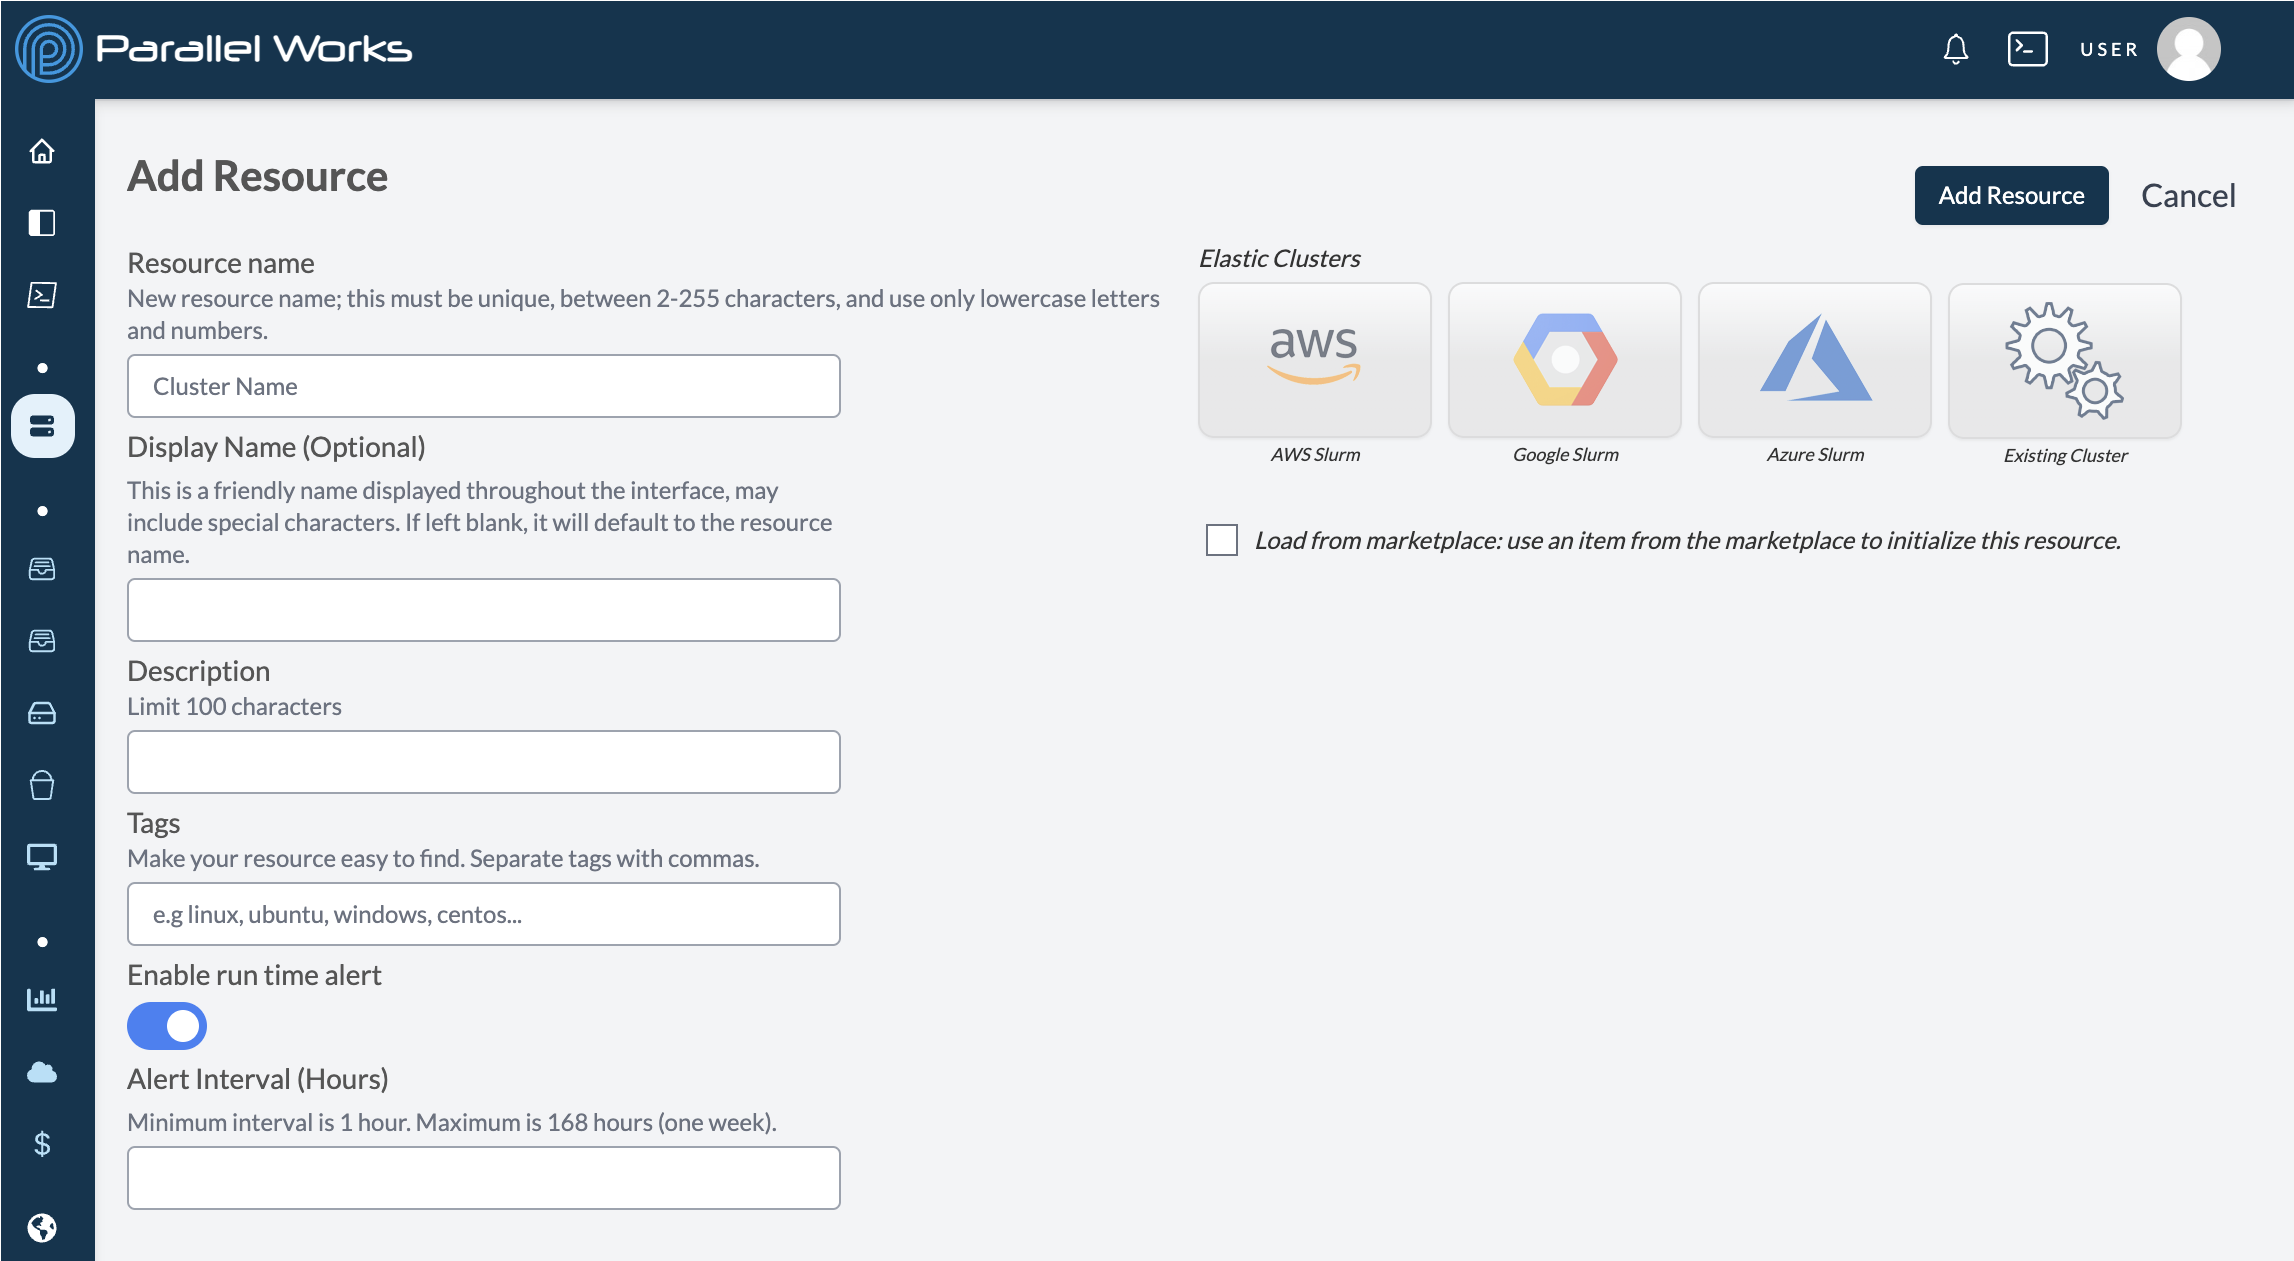 Screenshot of the Clusters page immediately after clicking the toggle button for Enable real time alert.